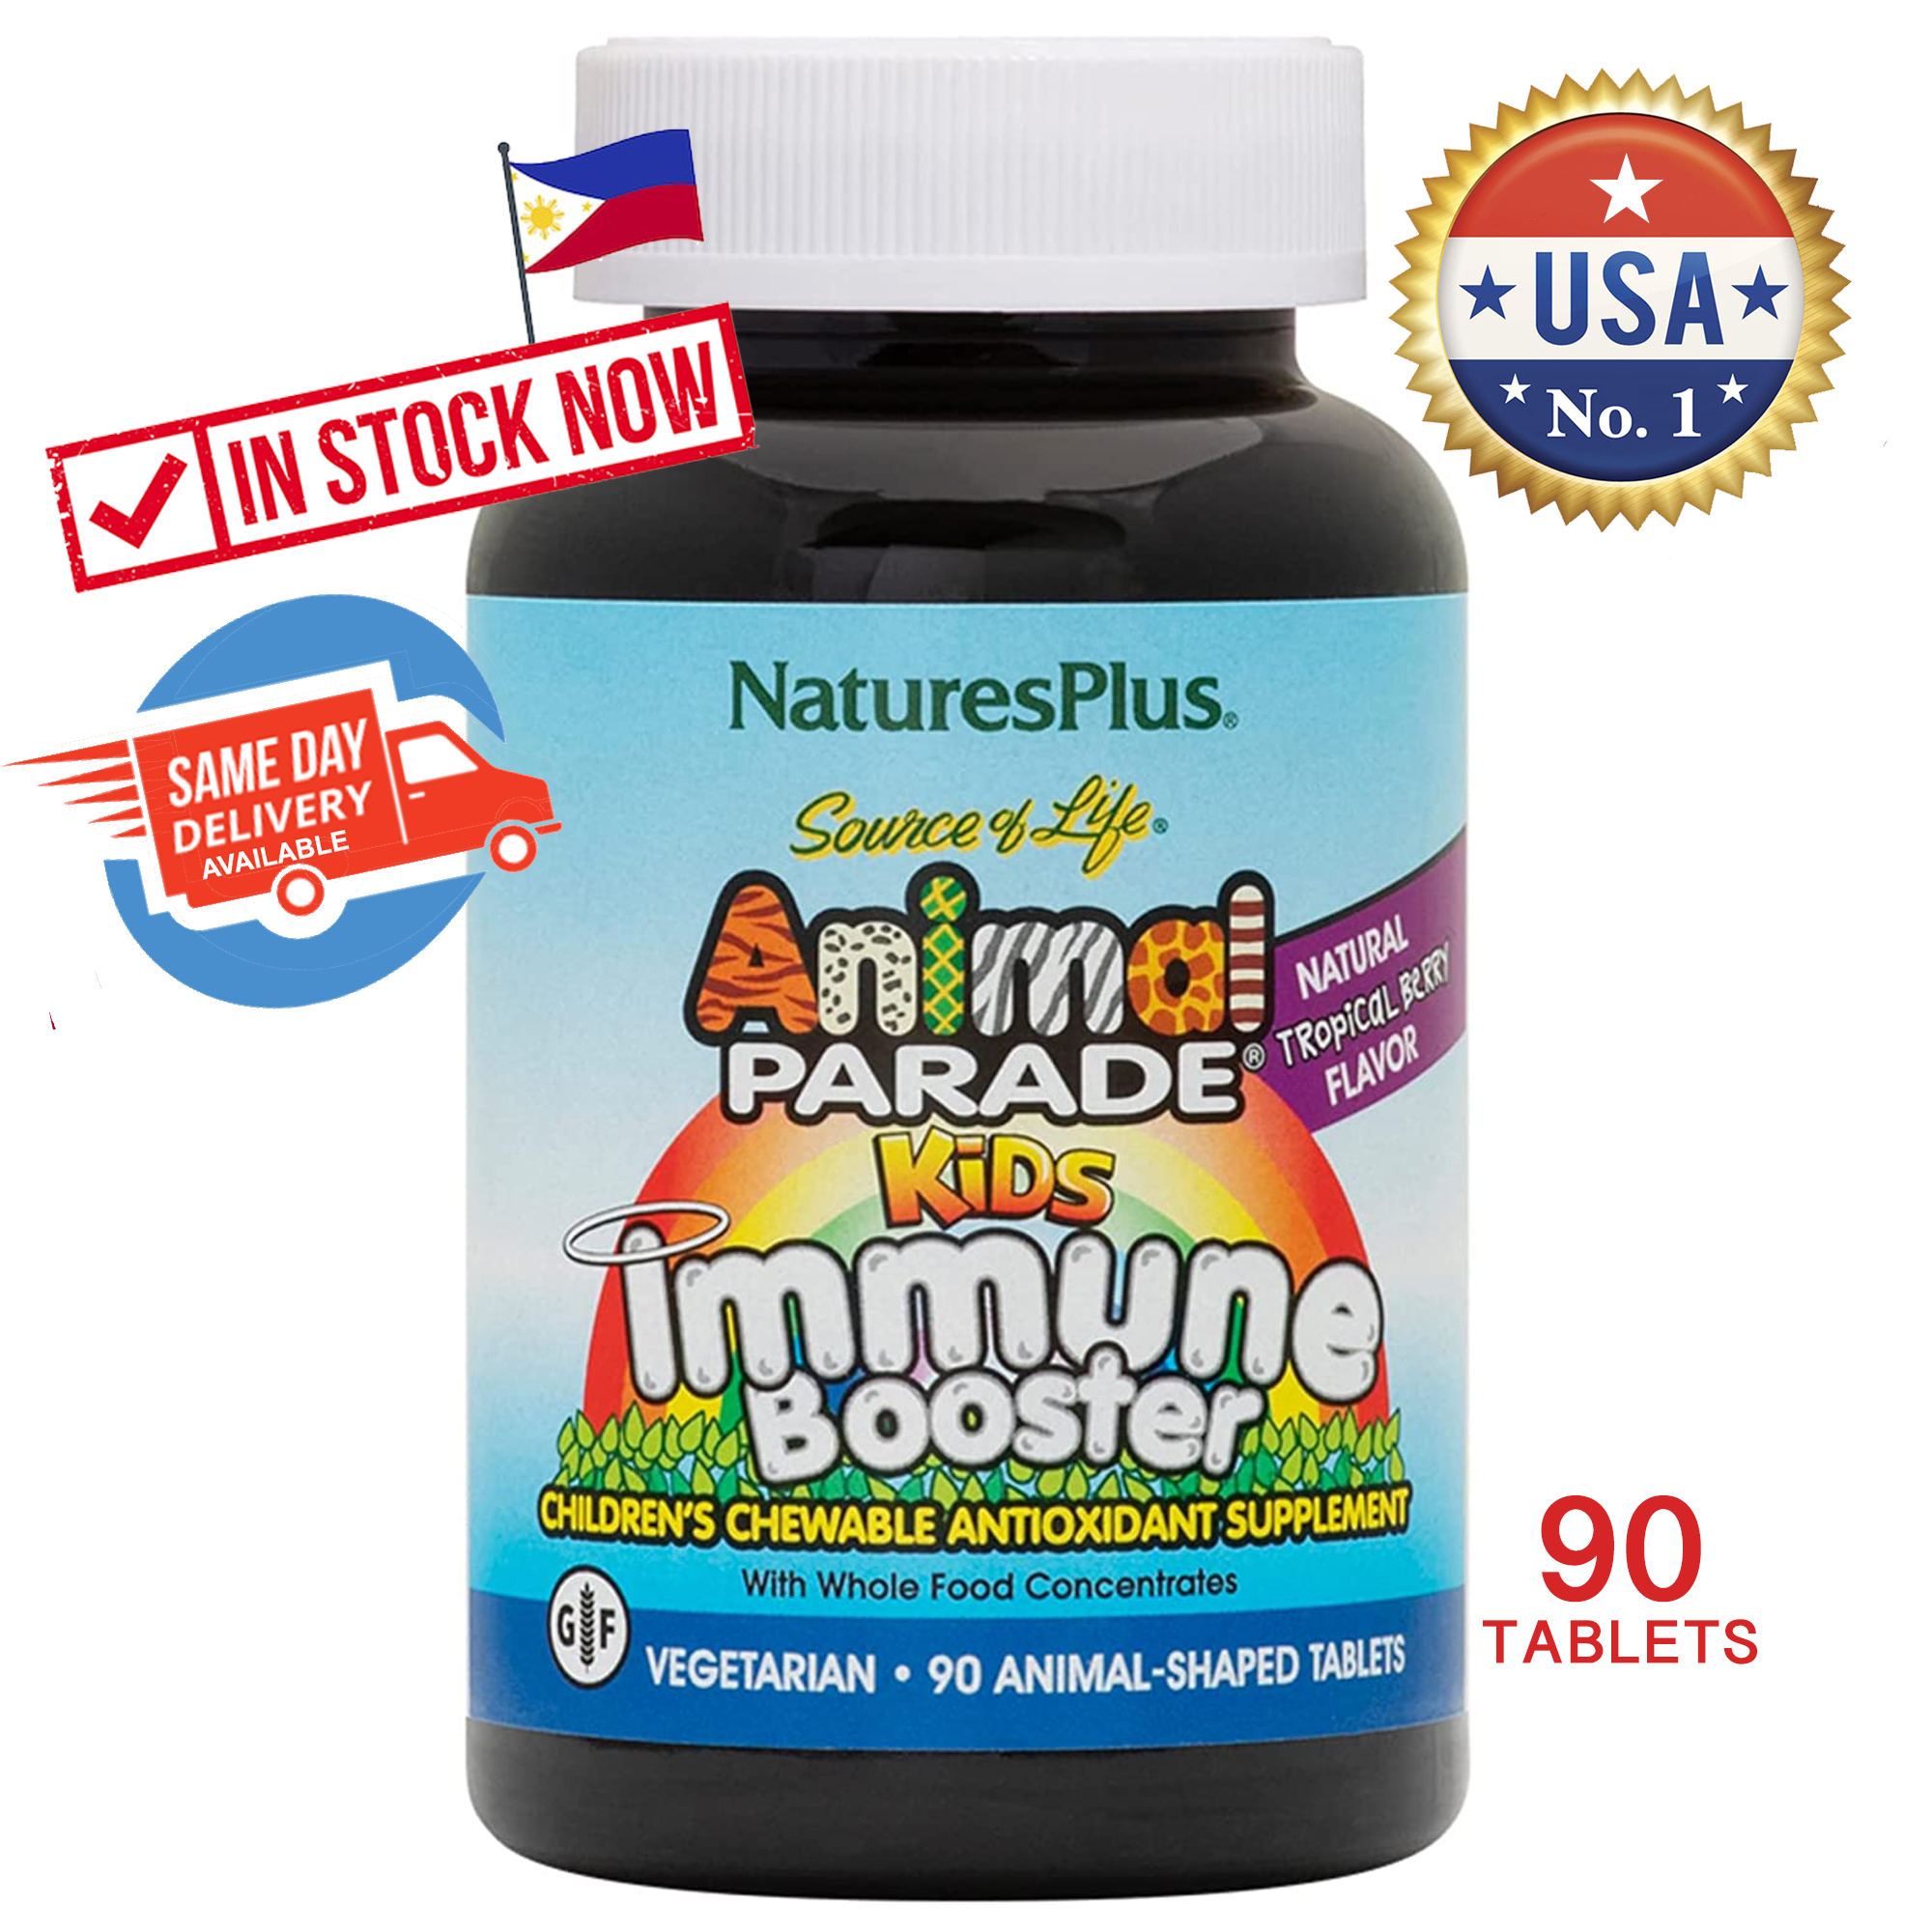 NaturesPlus Animal Parade Source of Life Kids Immune Booster Multivitamins  Chewables - Tropical Berry Flavor - 90 Animal Shaped Tablets - Gluten-Free  Kids Immunity Support Vitamin C Zinc Probiotics Grape Seed Supplements